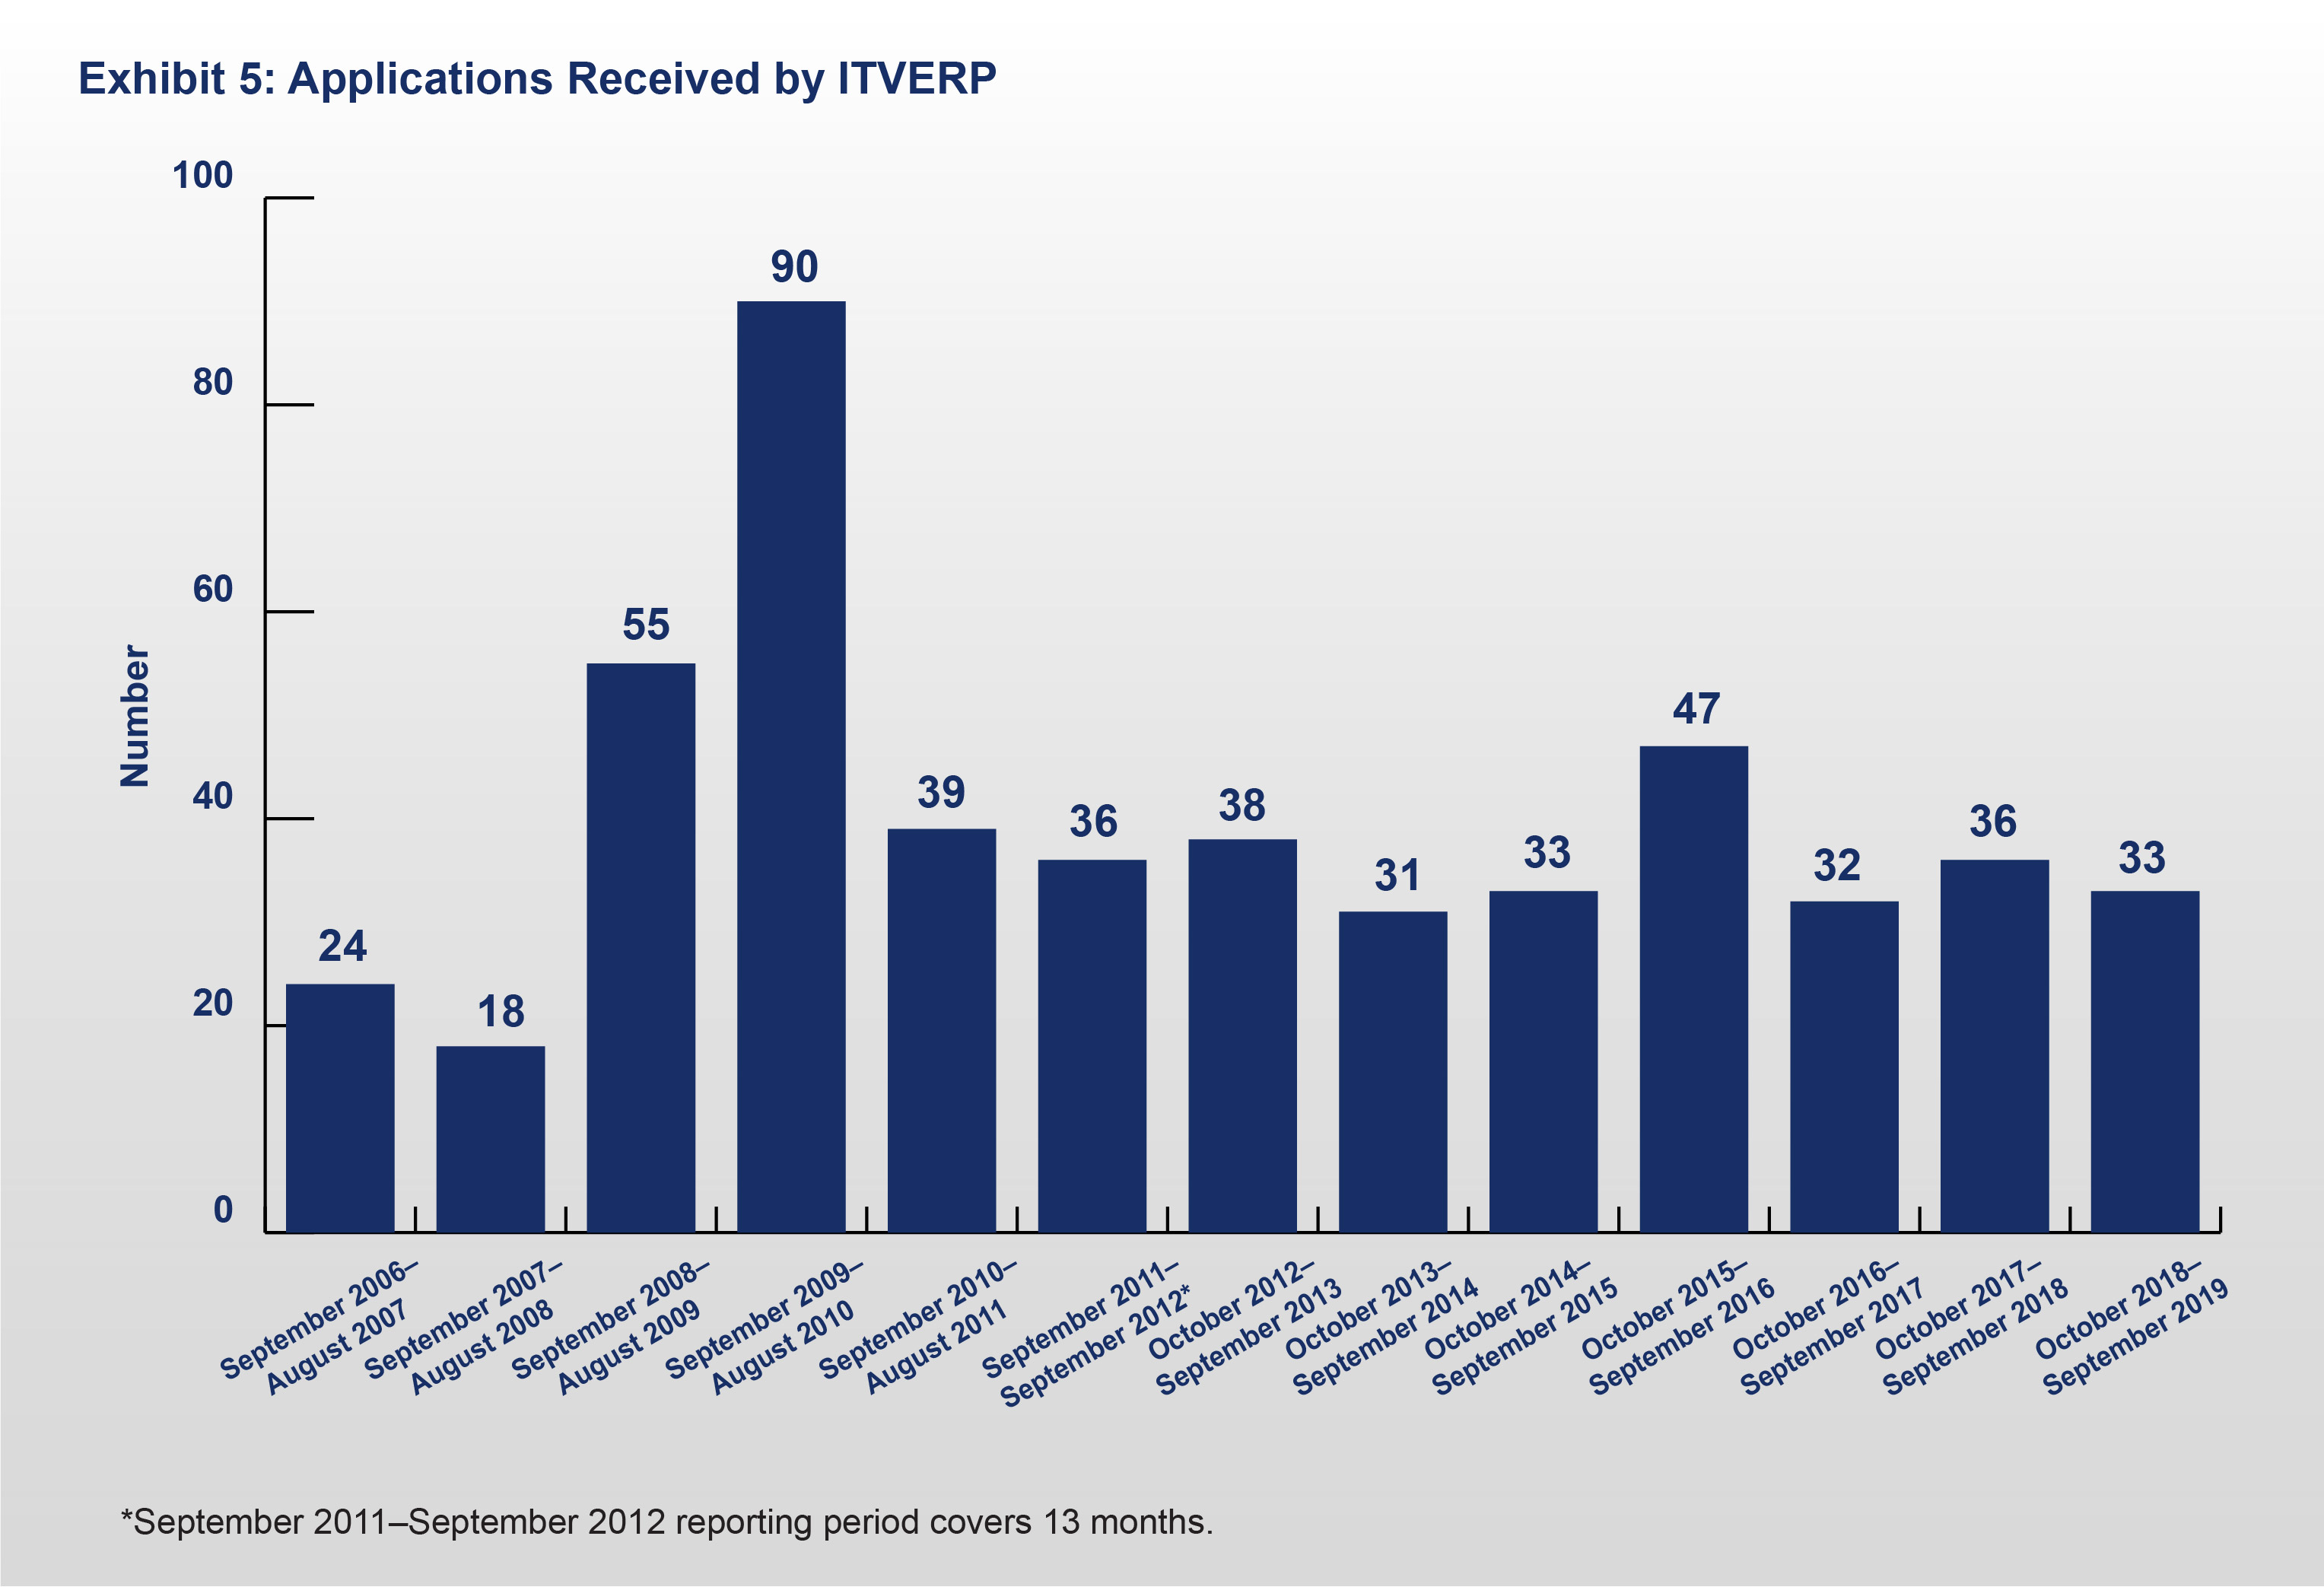 Exhibit 5: Applications Received by ITVERP (As of September 2019)